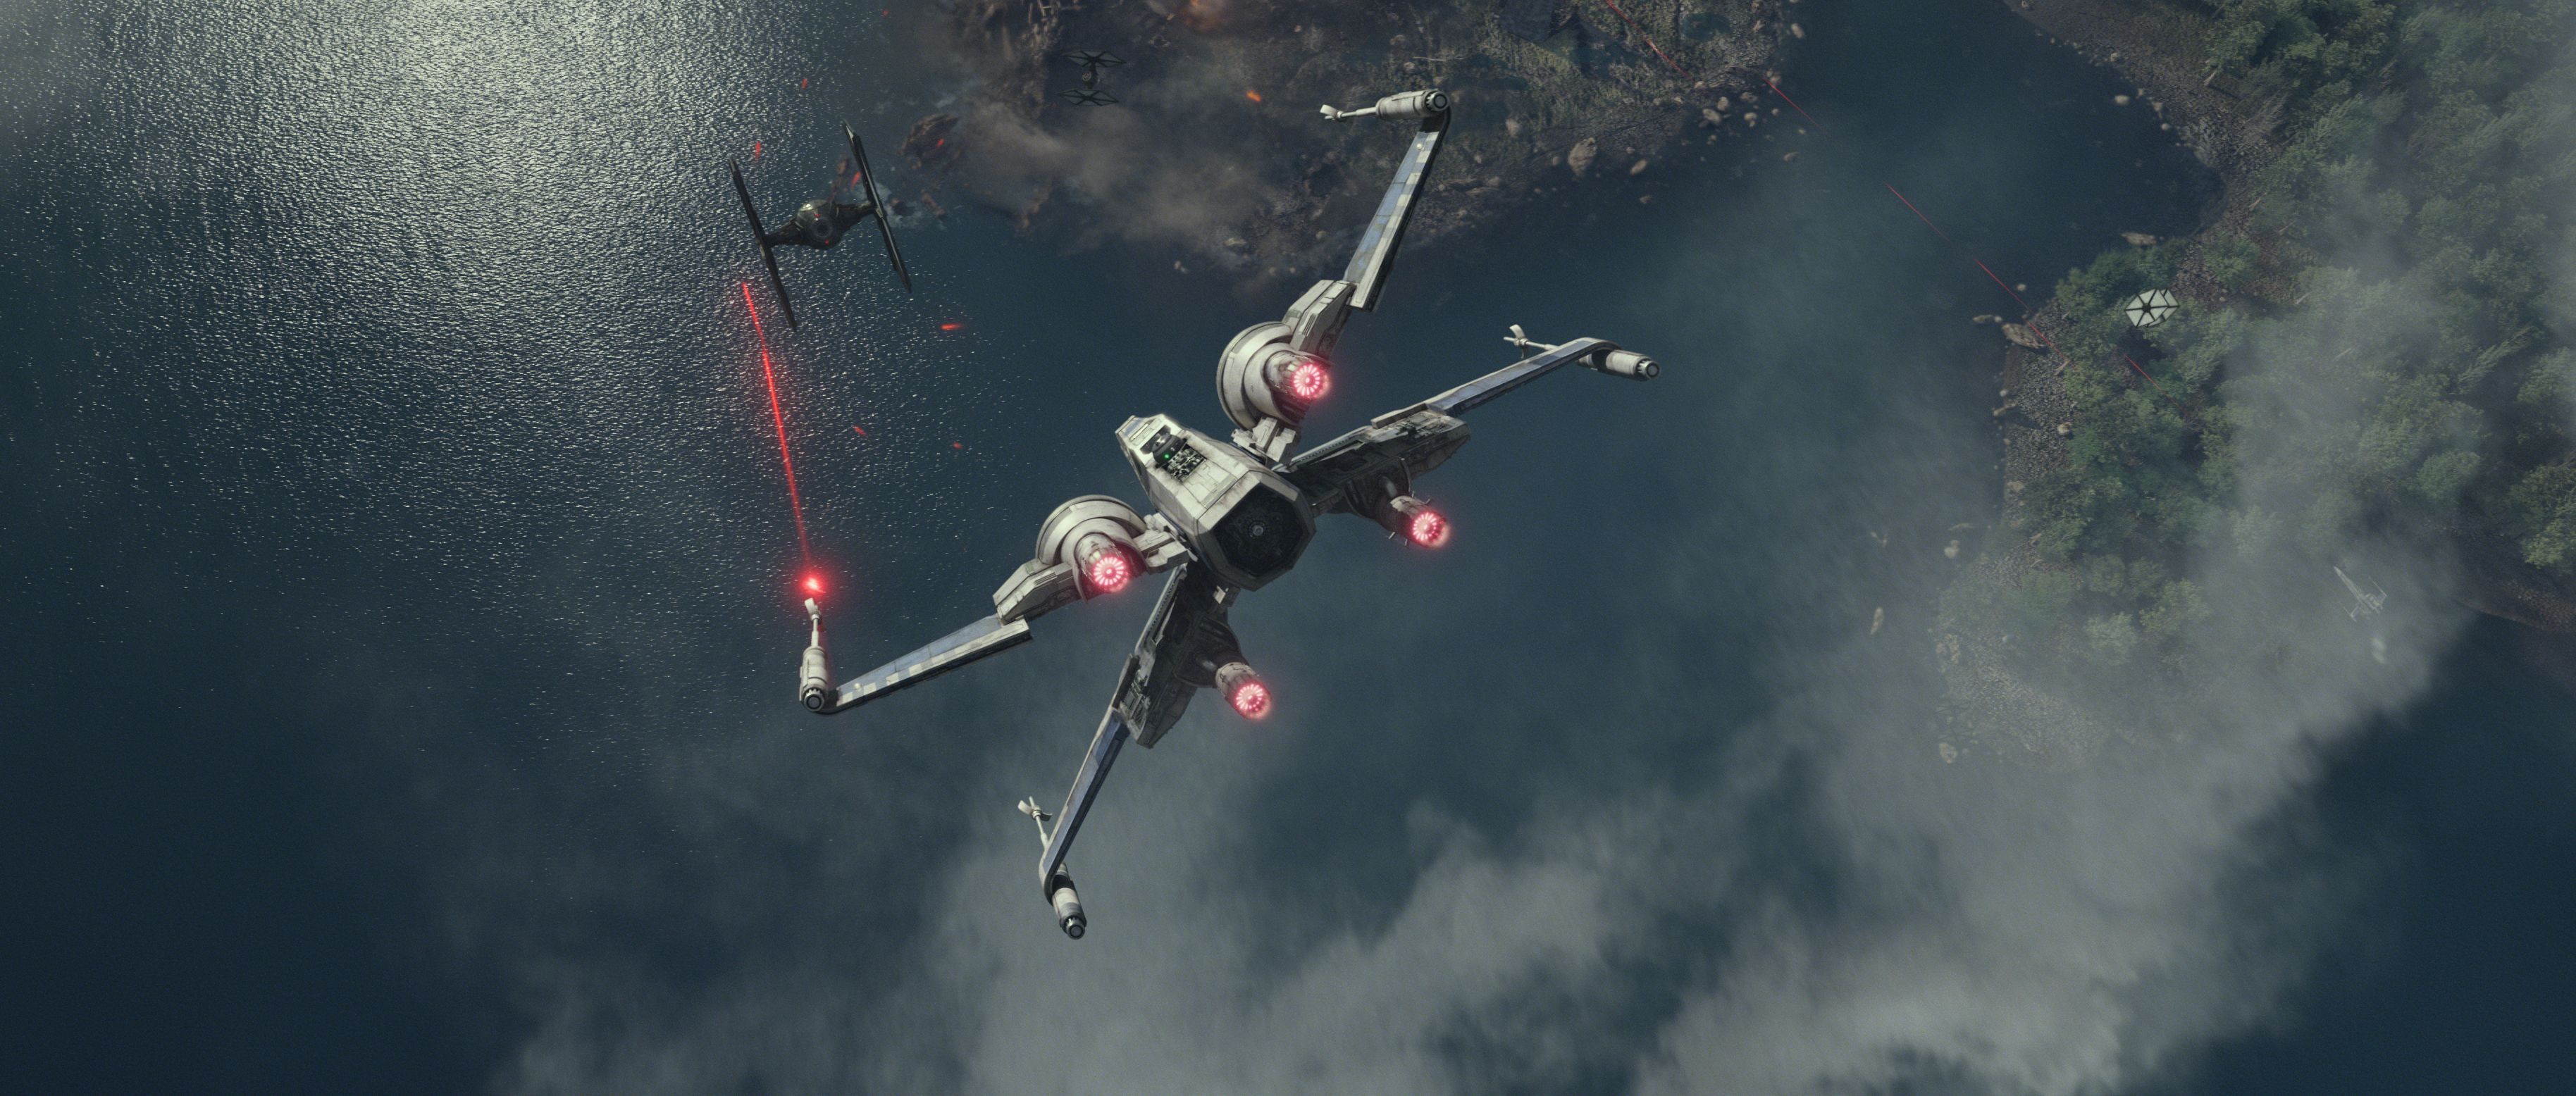 Star Wars 7 Images Are Perfect for Desktop Wallpaper Collider